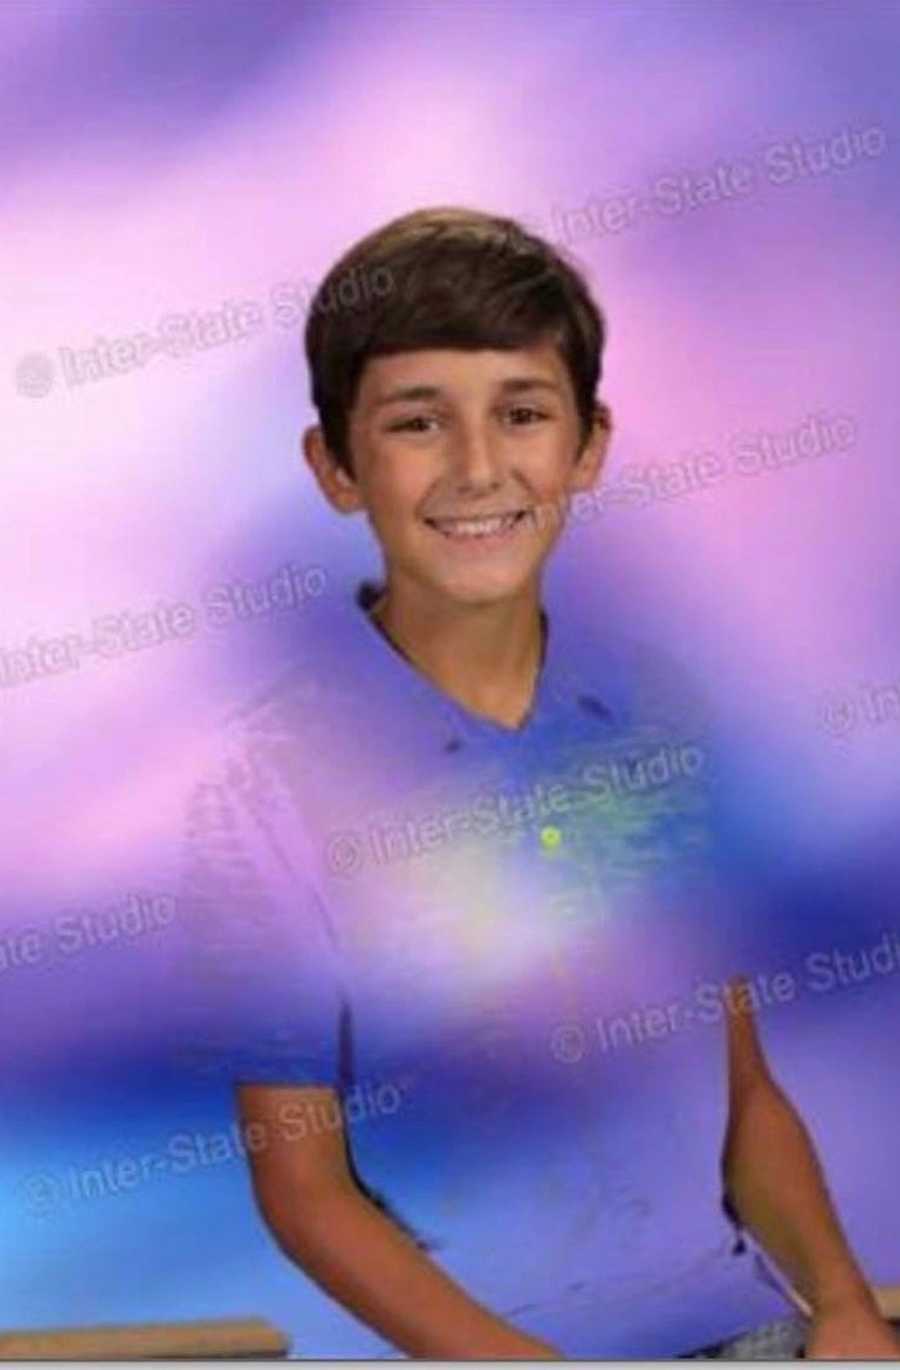 Floating head in purple tie-dye background as kid wore green shirt that blended in with green screen